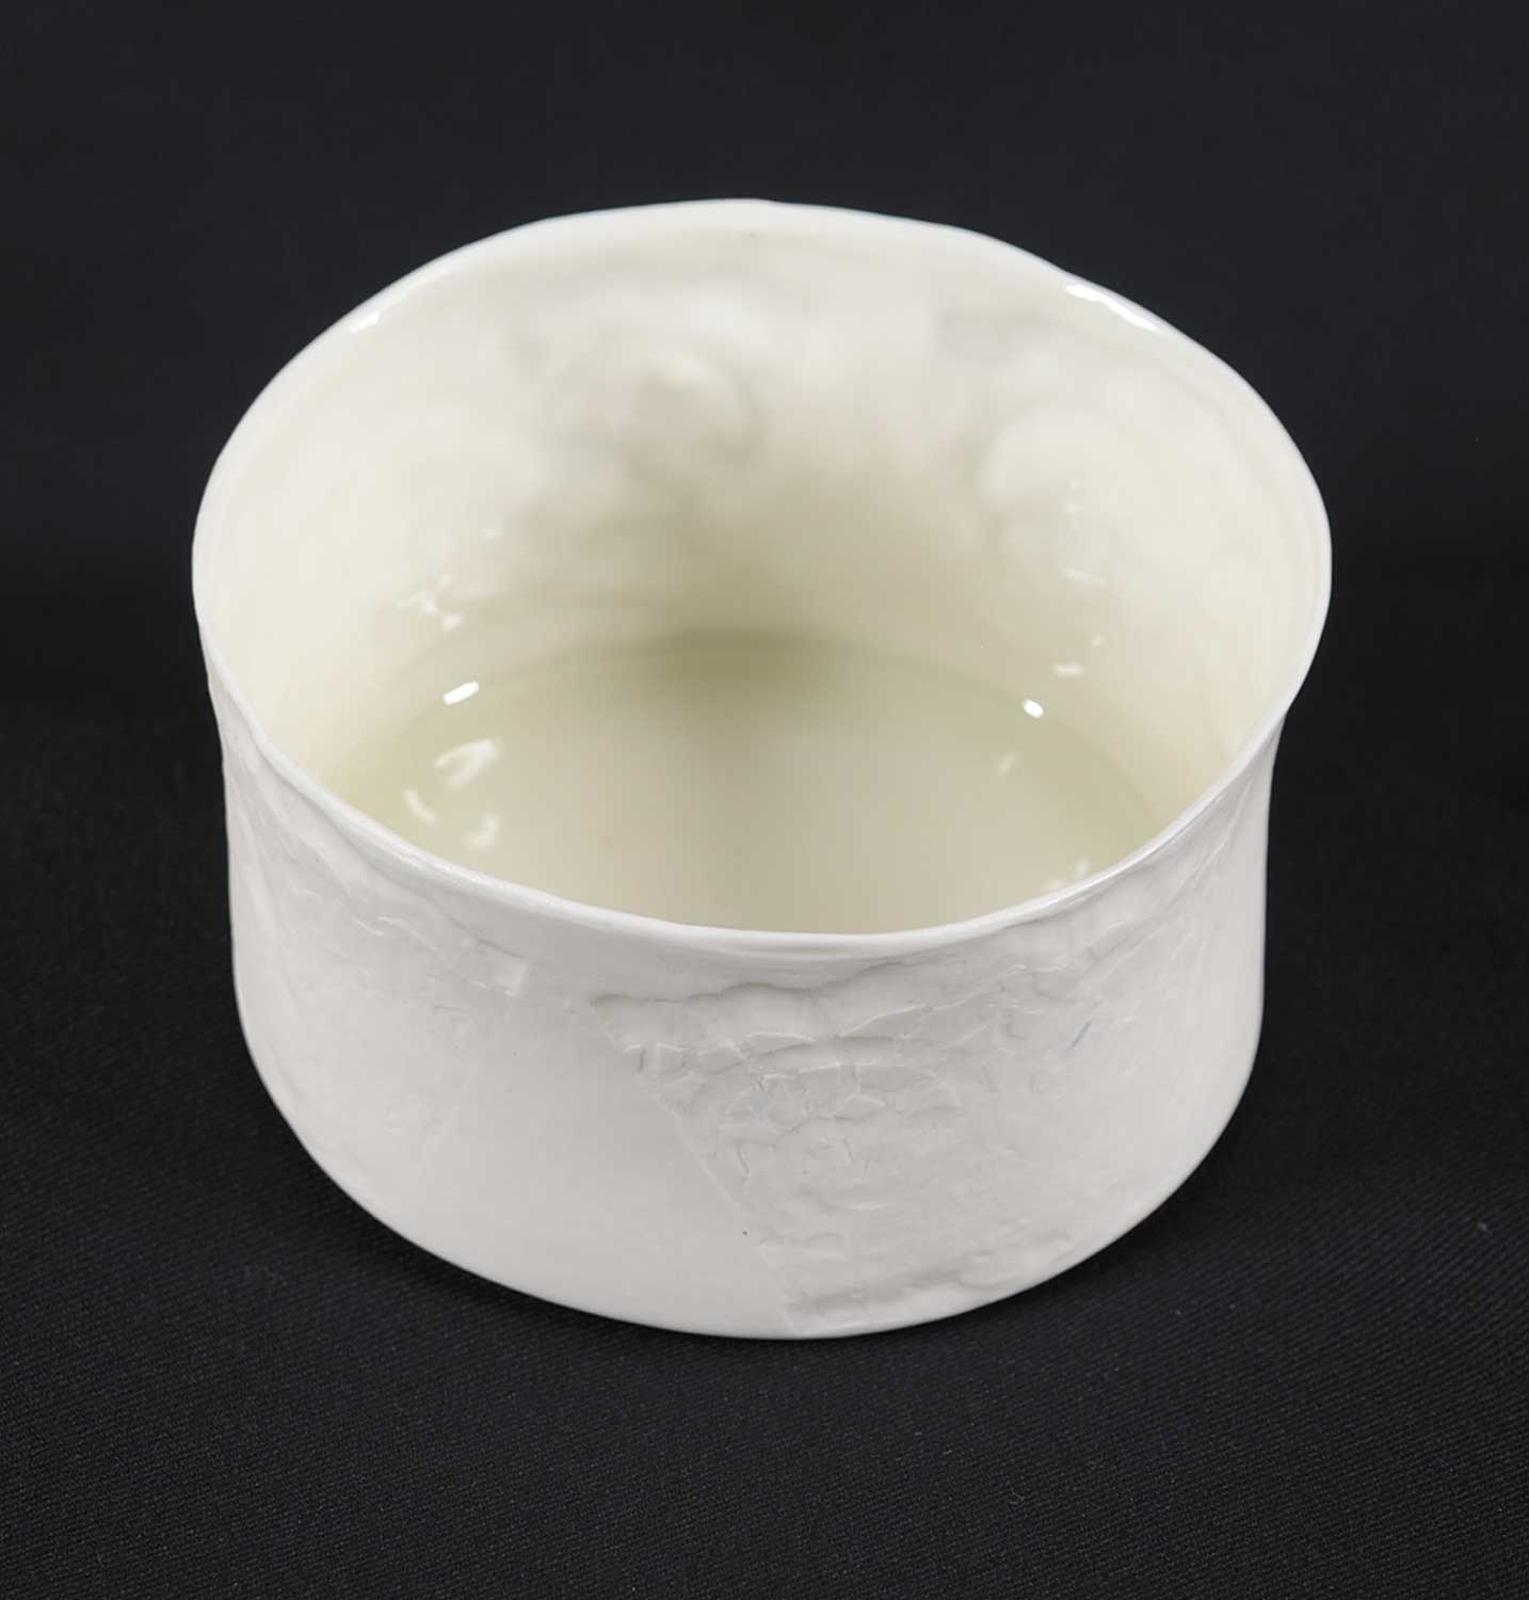 Cylindrical Porcelain Bowl by artist Alison Arnold